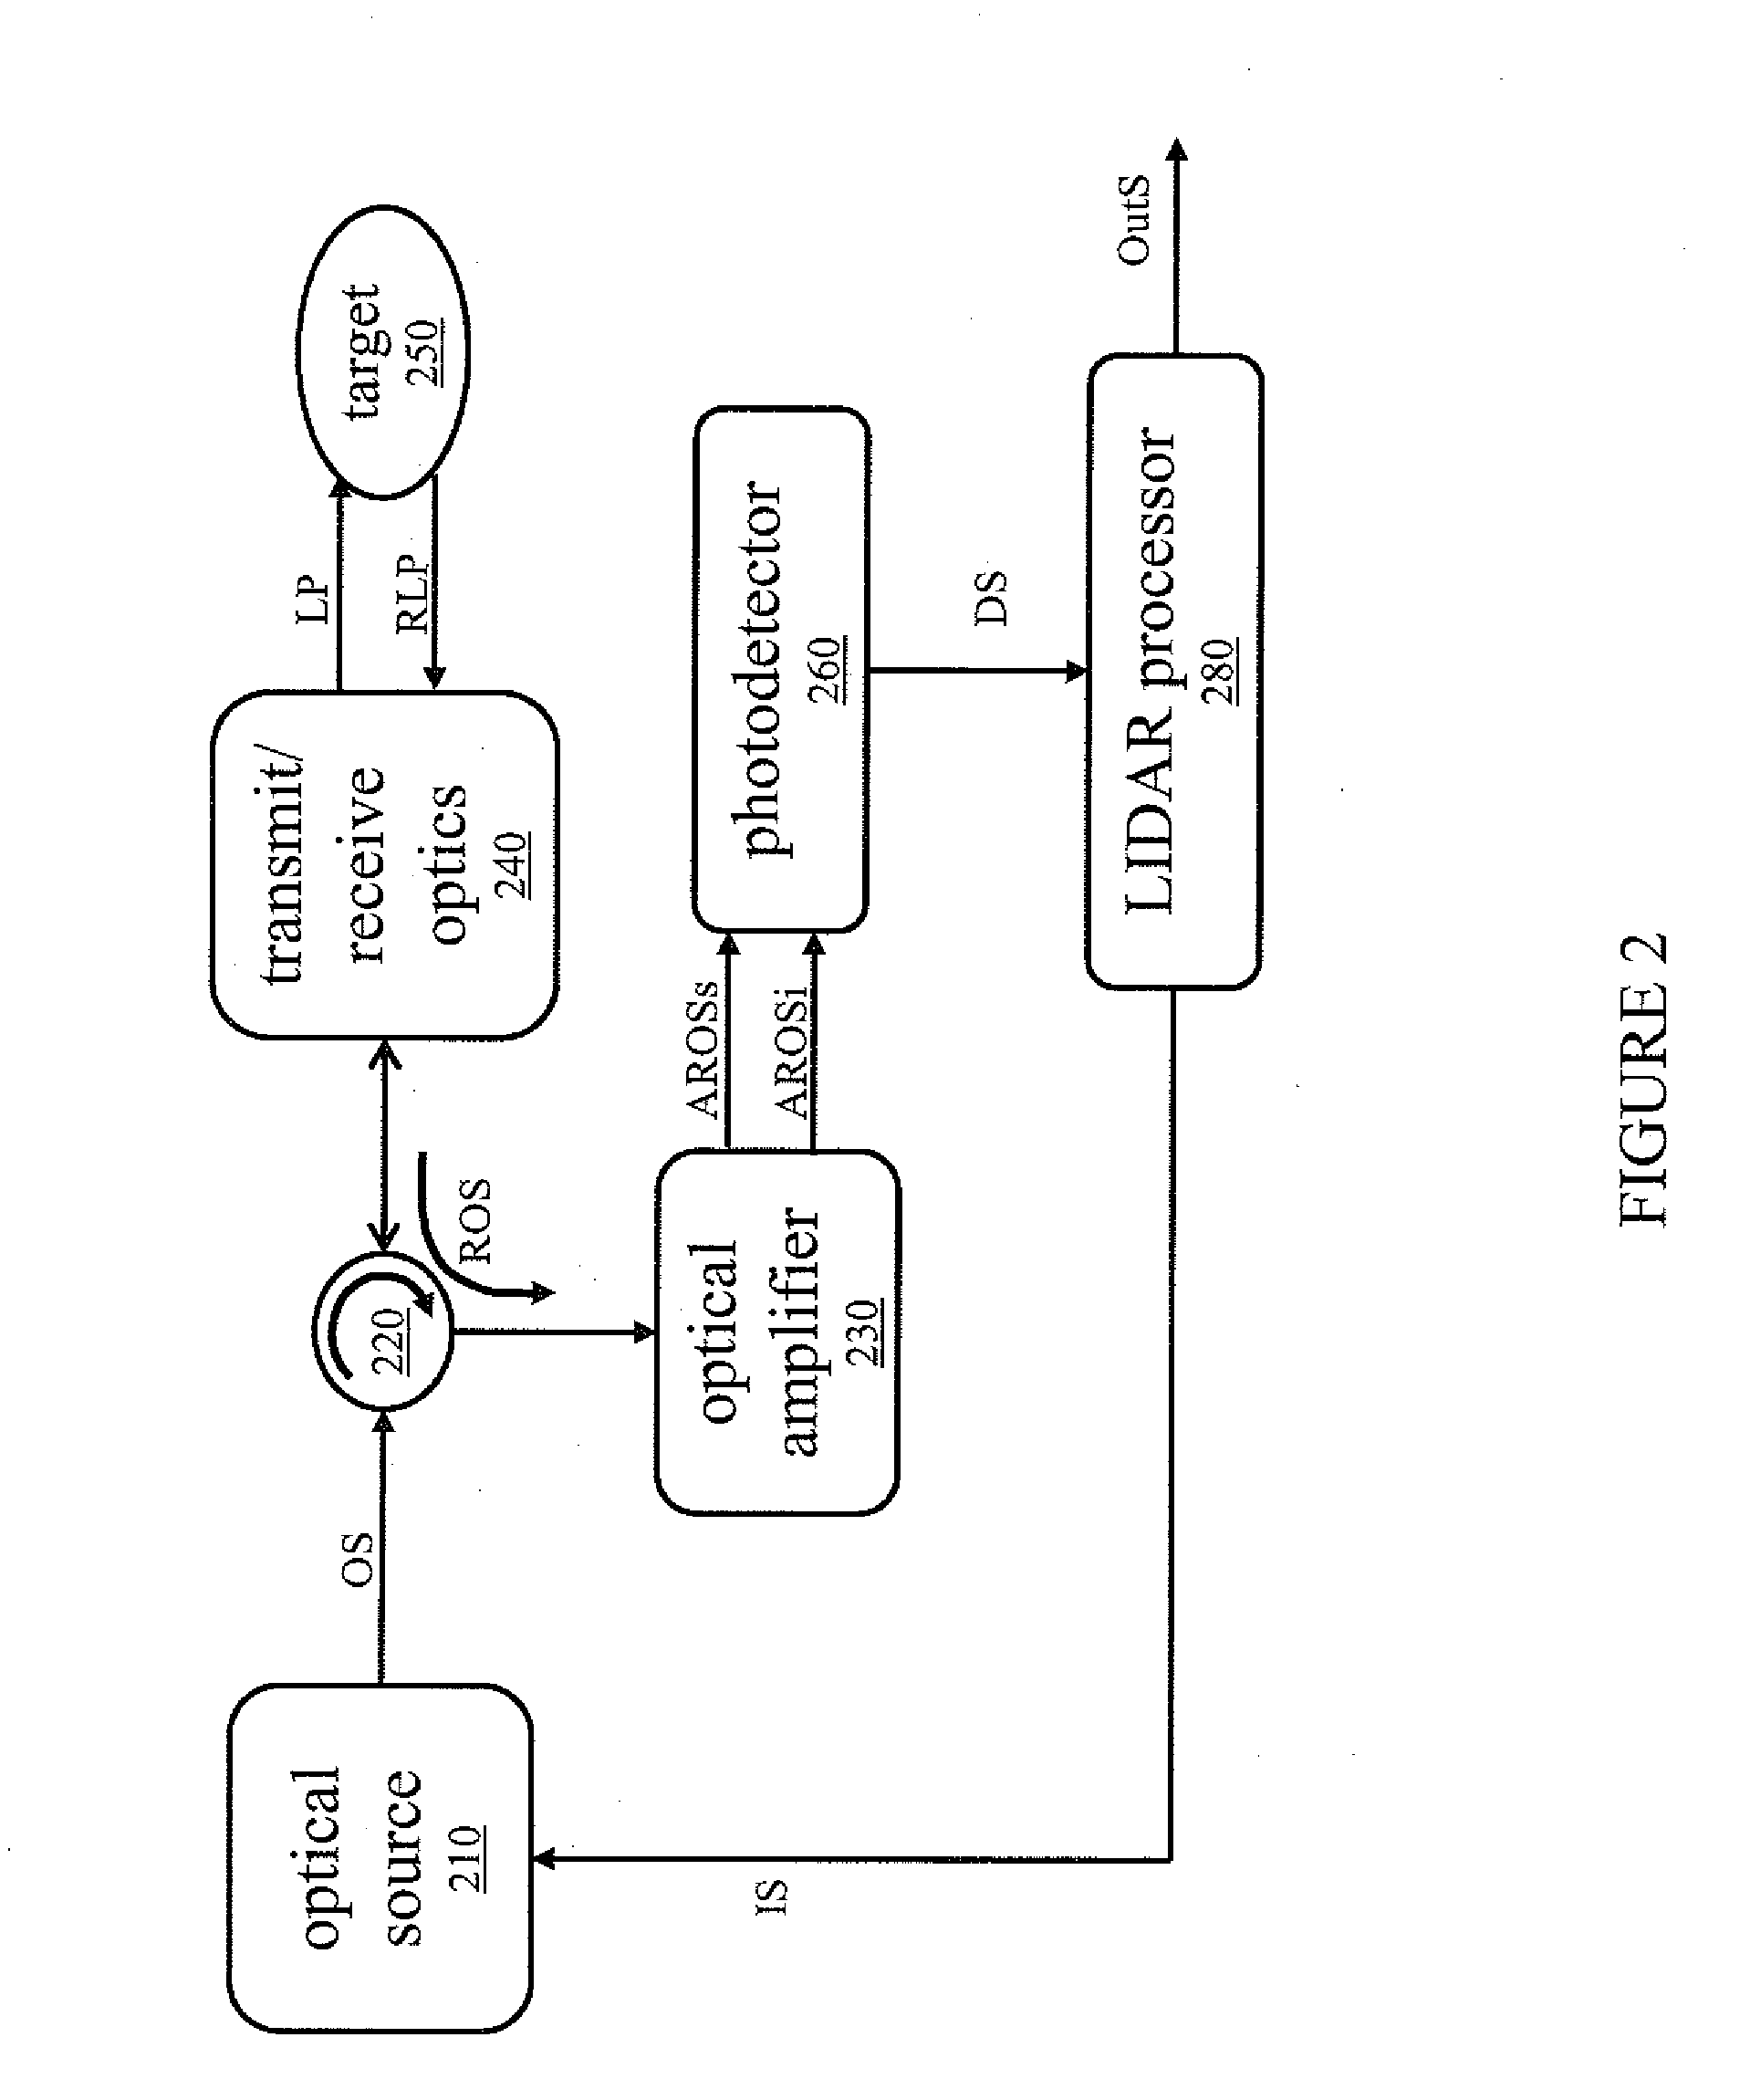 System and Method for Nonlinear Optical Devices